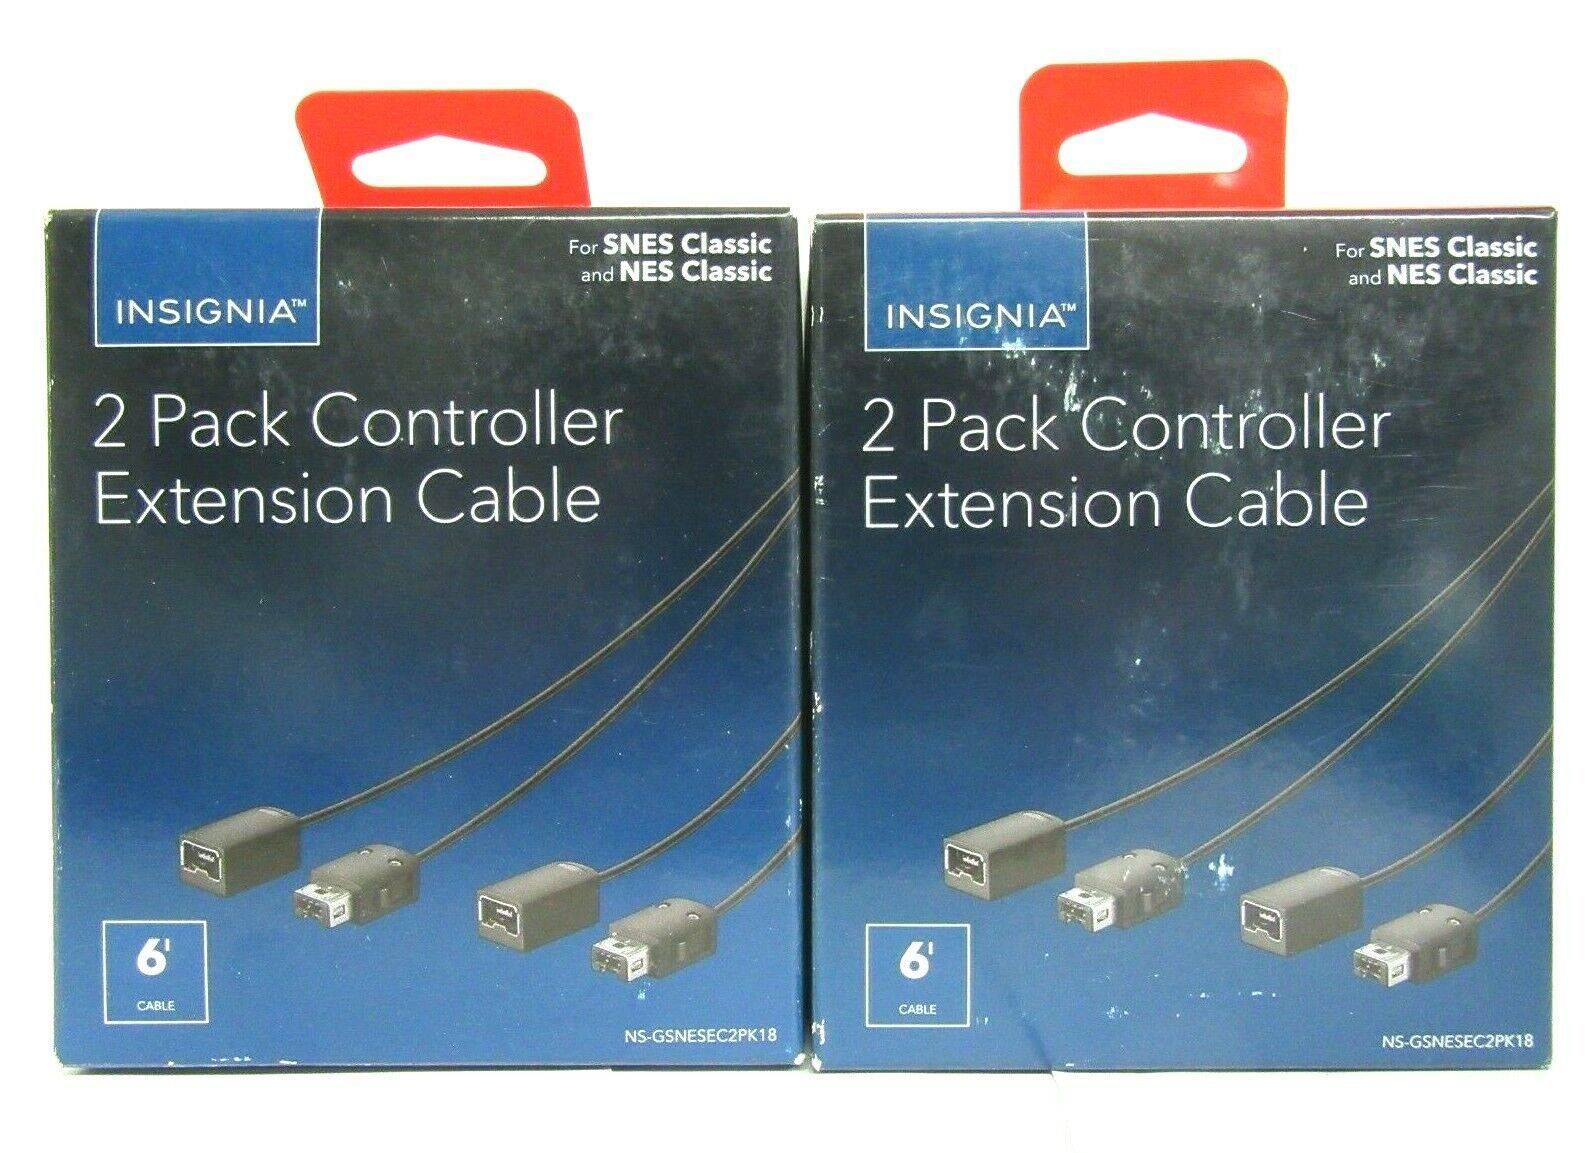 LOT of 2 Insignia 6' Extension Cable for Nintendo NES and SNES Controllers 2-PK - $11.64